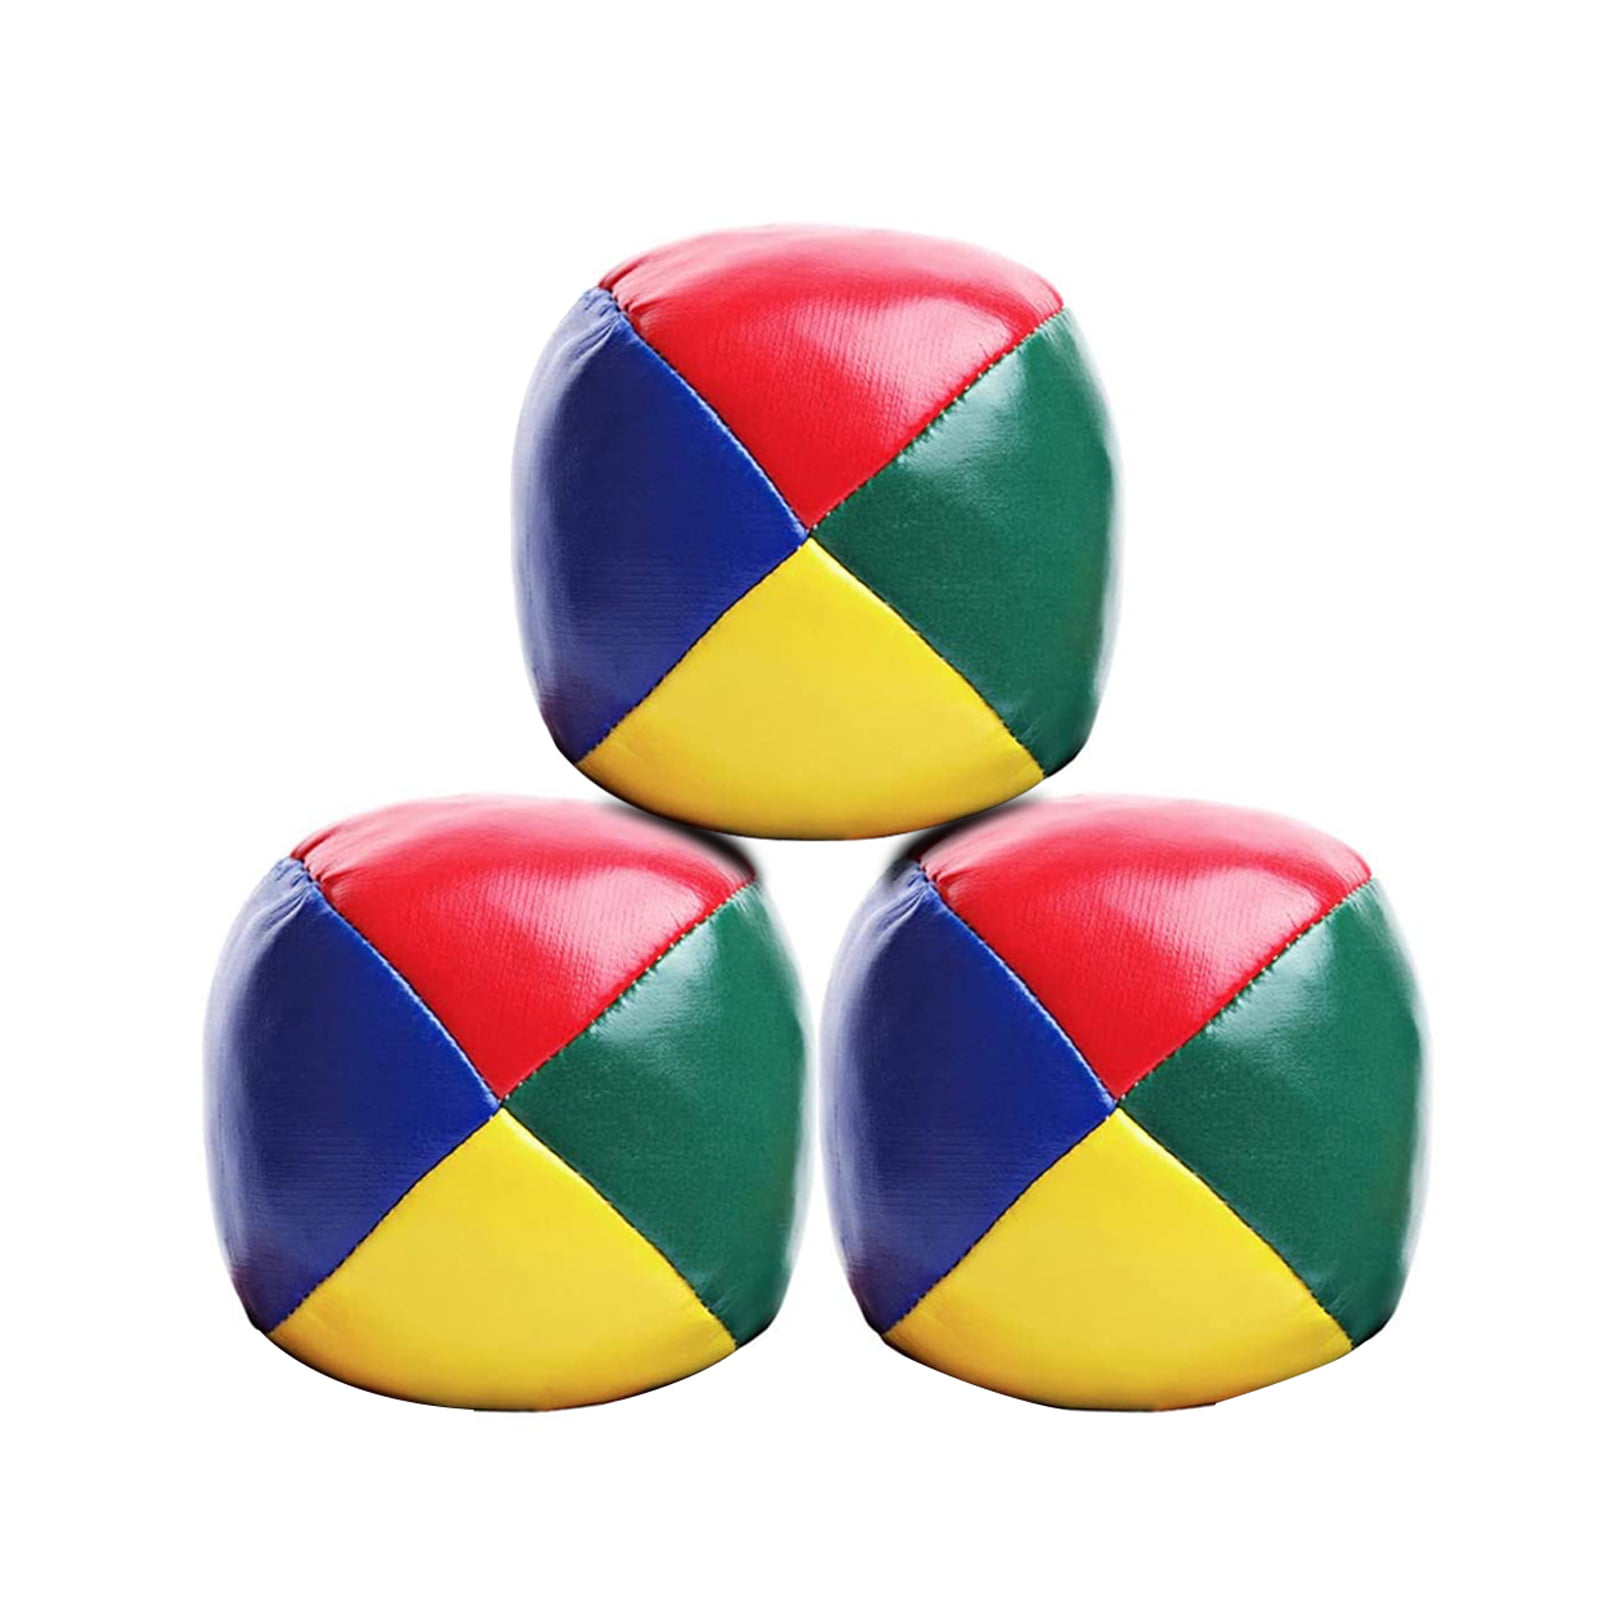 LEARN TO JUGGLE by CE Toys 3 x Multi-Coloured Juggling Balls